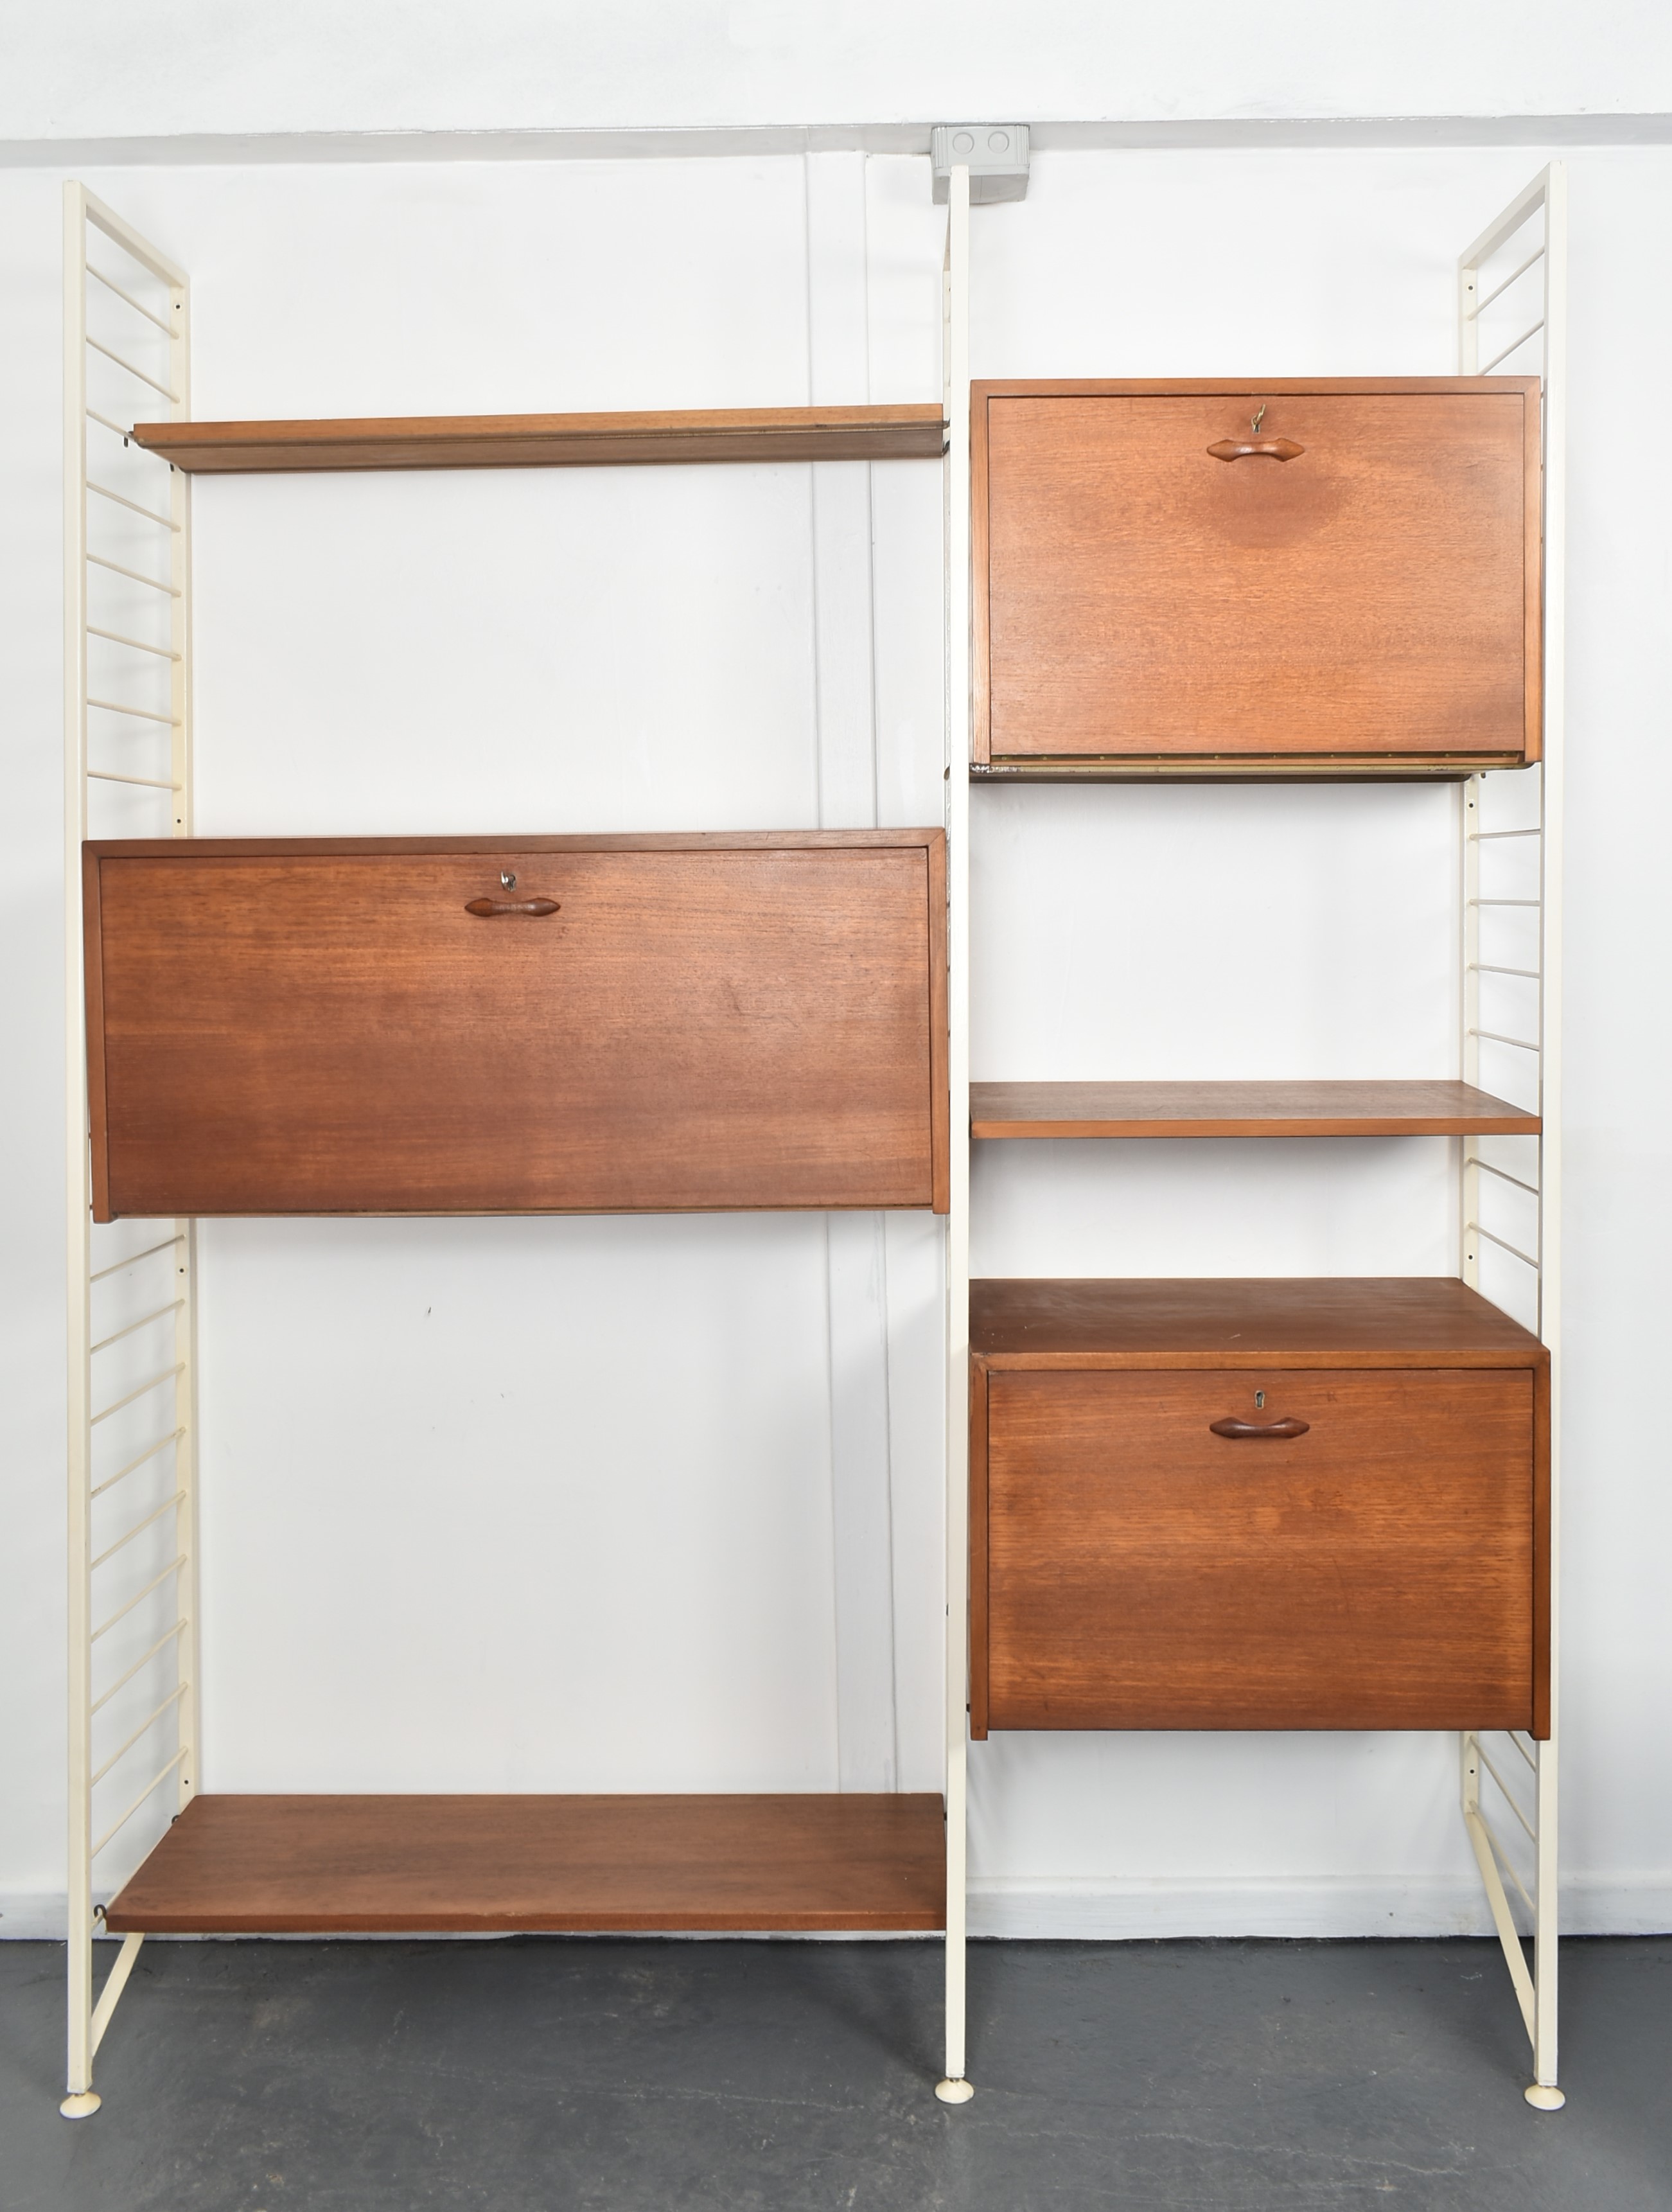 ROBERT HEAL FOR STAPLES - LADDERAX - TWO BAY WALL UNIT